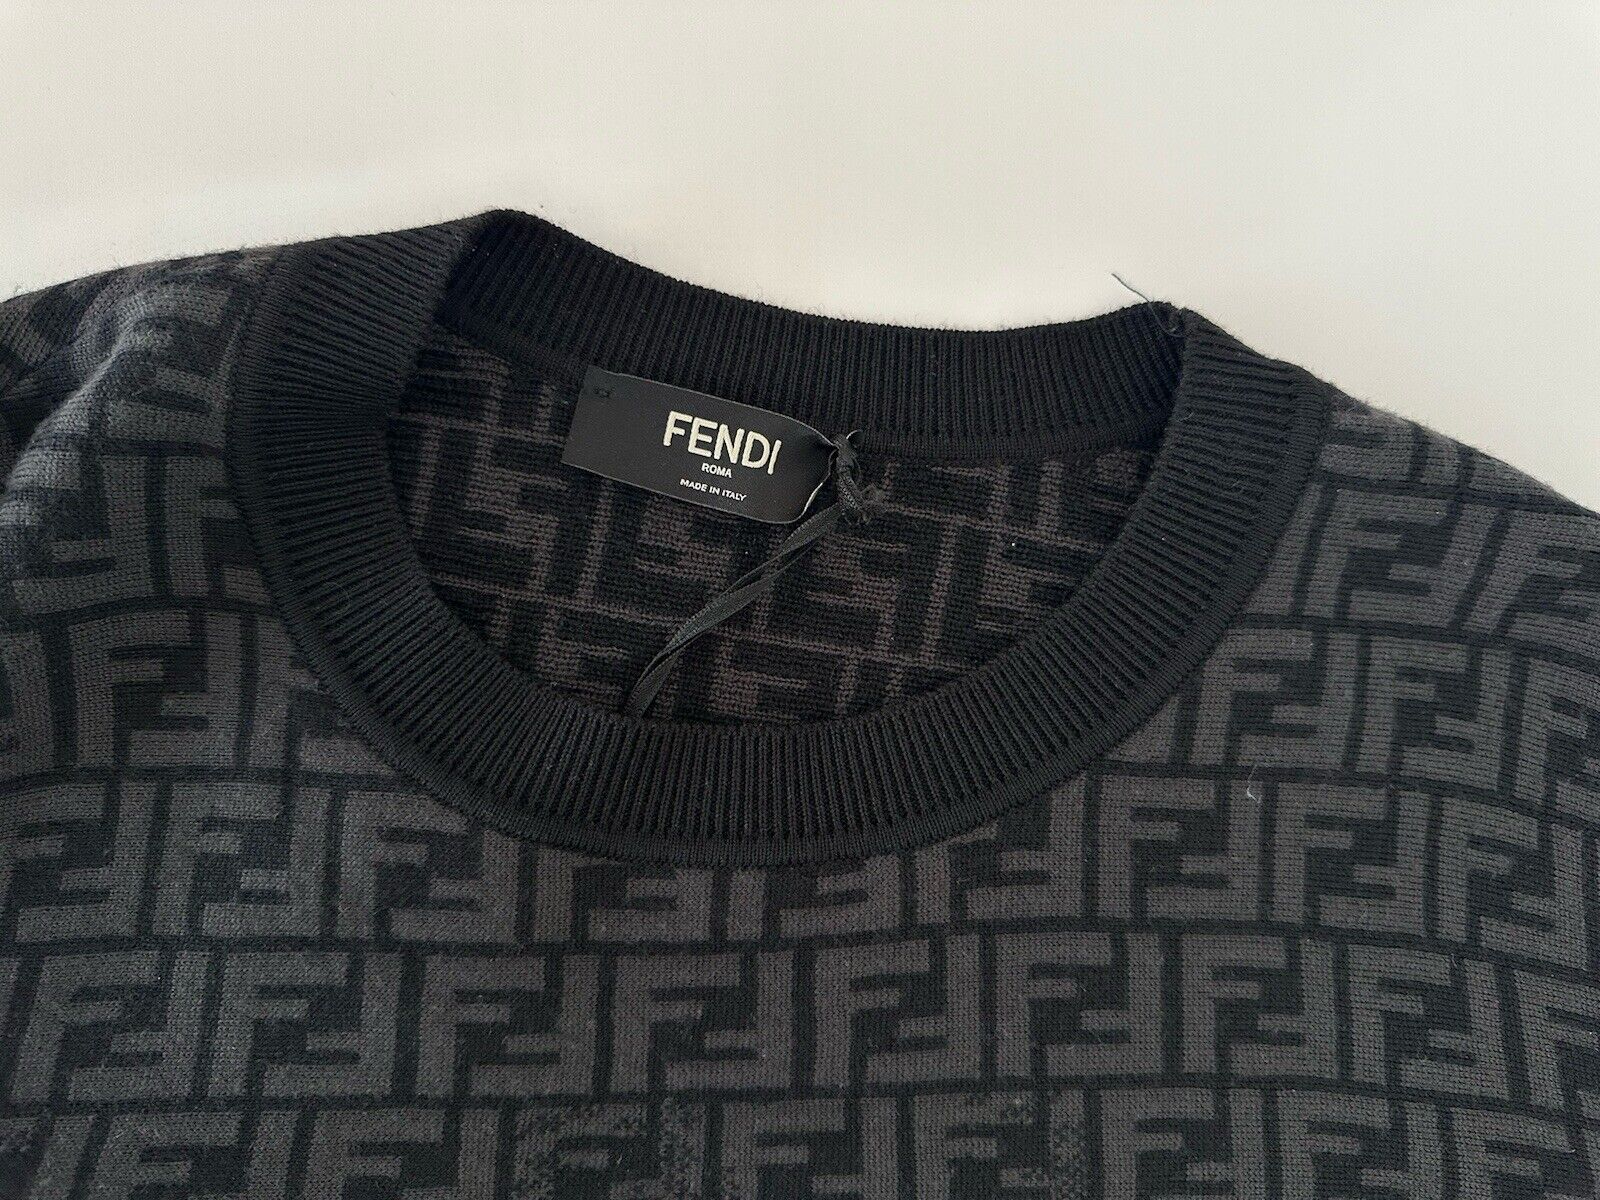 Fendi Knit Wool Sweater 54 Euro (Fits like M-L) FZX005 Made in Italy NWT $1350